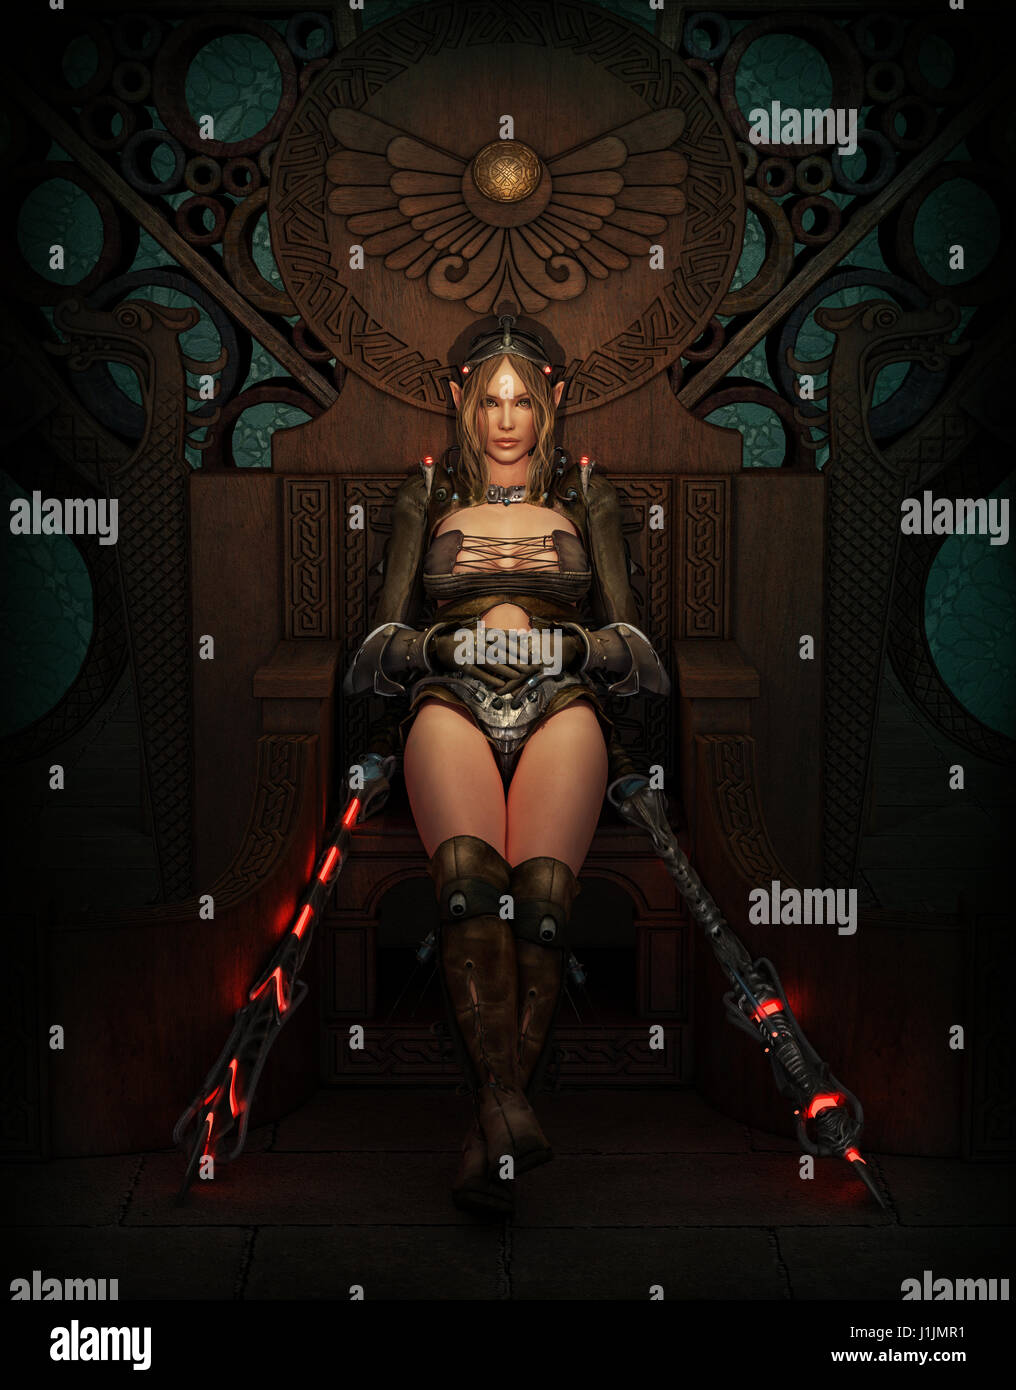 3D computer graphics of a female warrior with fantasy clothing and weapons Stock Photo